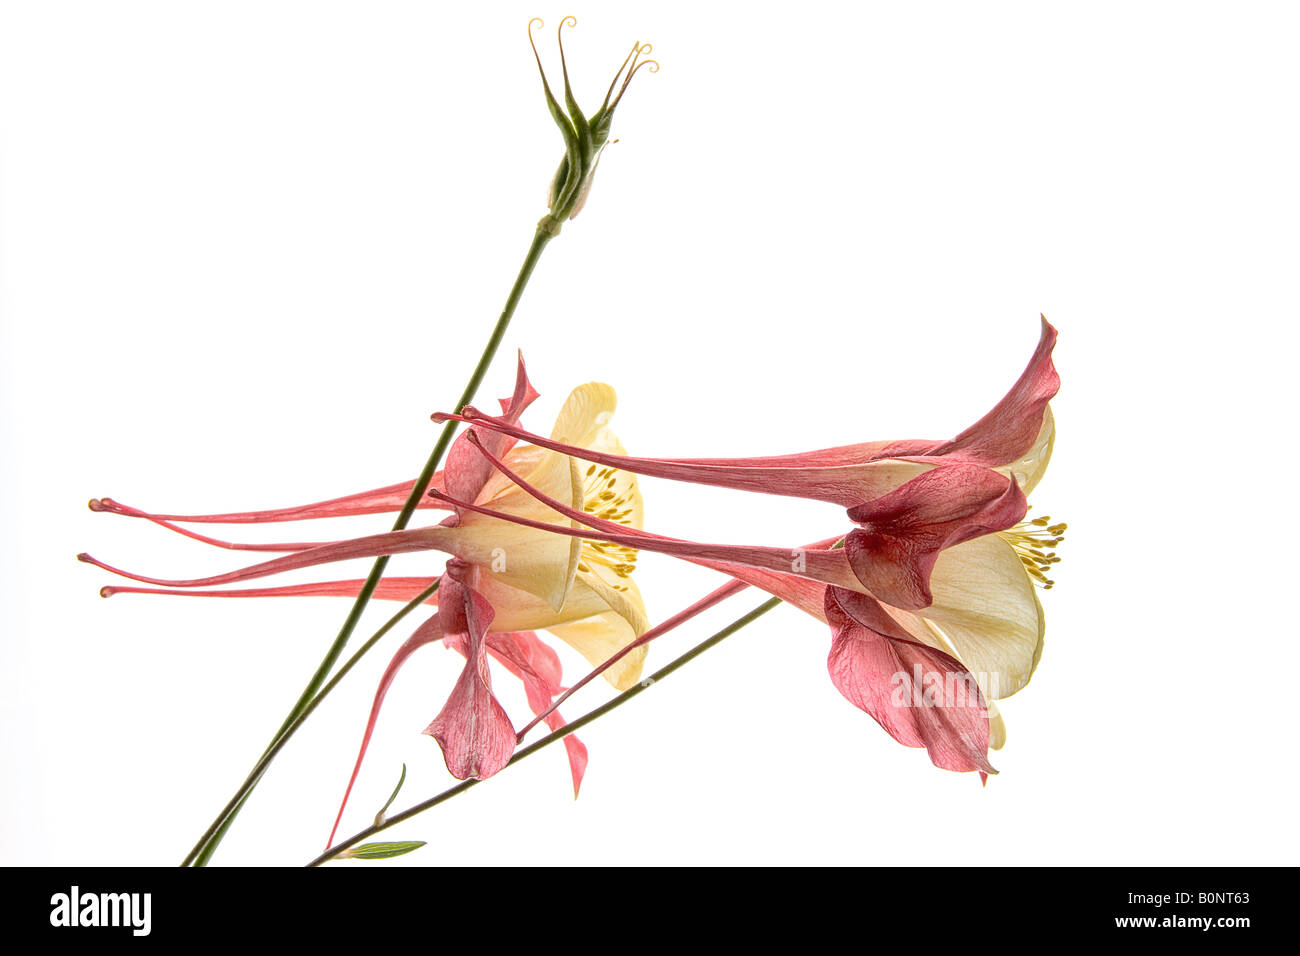 Close-up of the side view of two pink aquilegia flowers against white background Stock Photo